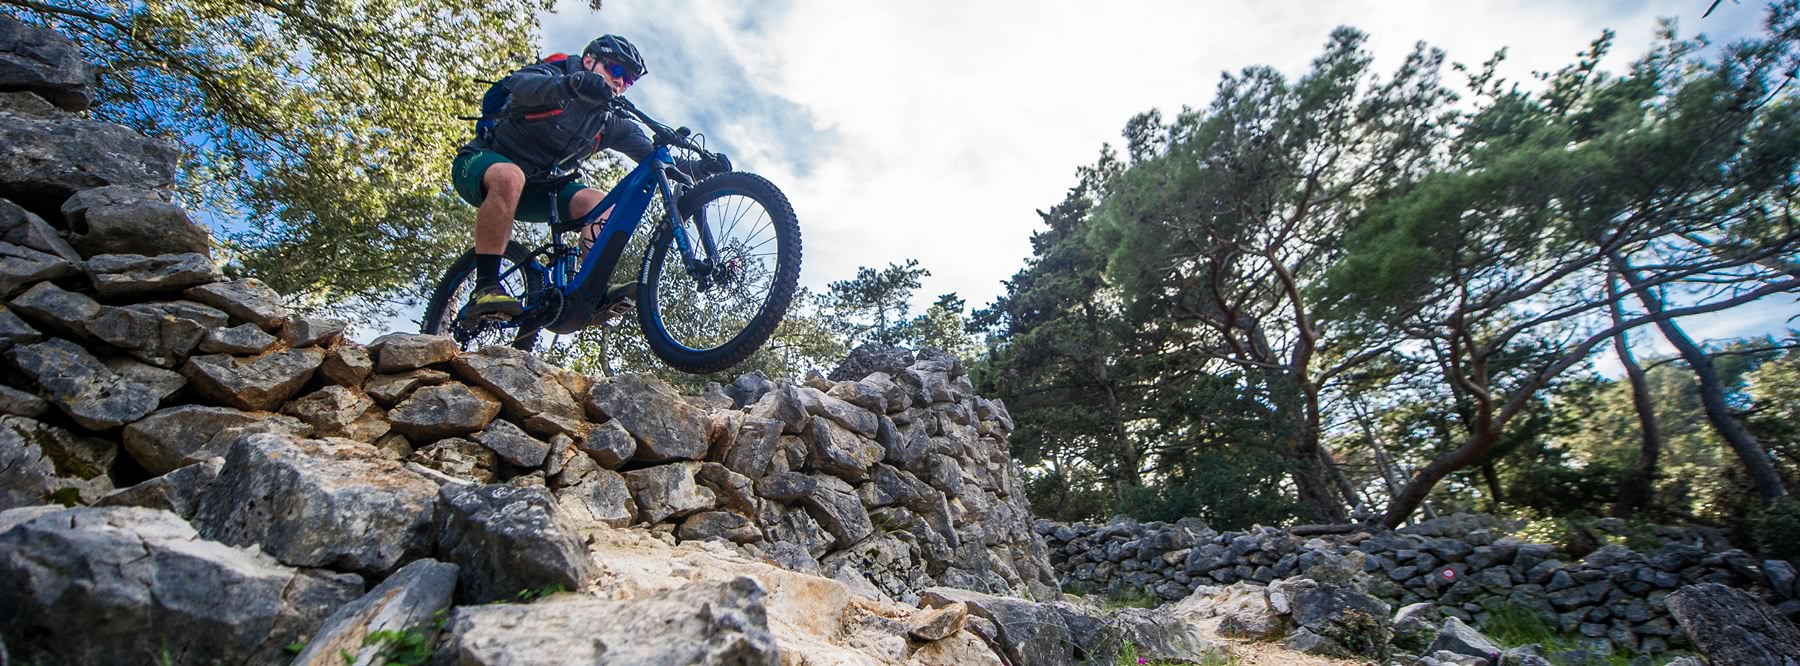 Haast je Ontvangende machine levering aan huis MTB & Boat South Dalmatia Special | Guided MTB tours in Croatia -  Islandhopping - cycling holiday by the sea